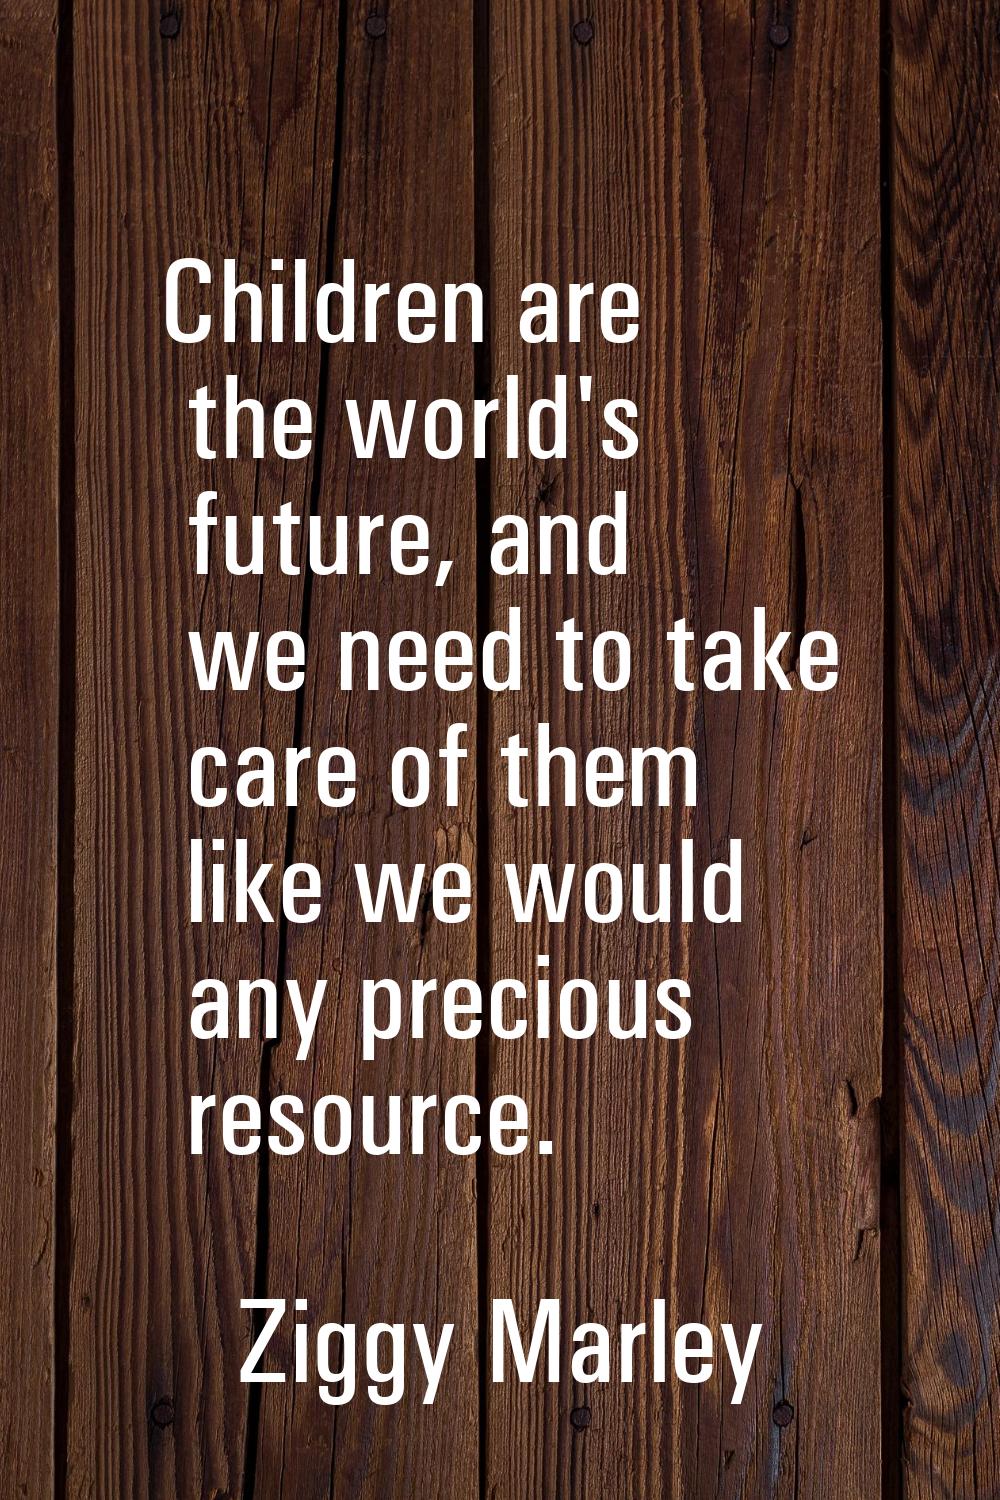 Children are the world's future, and we need to take care of them like we would any precious resour